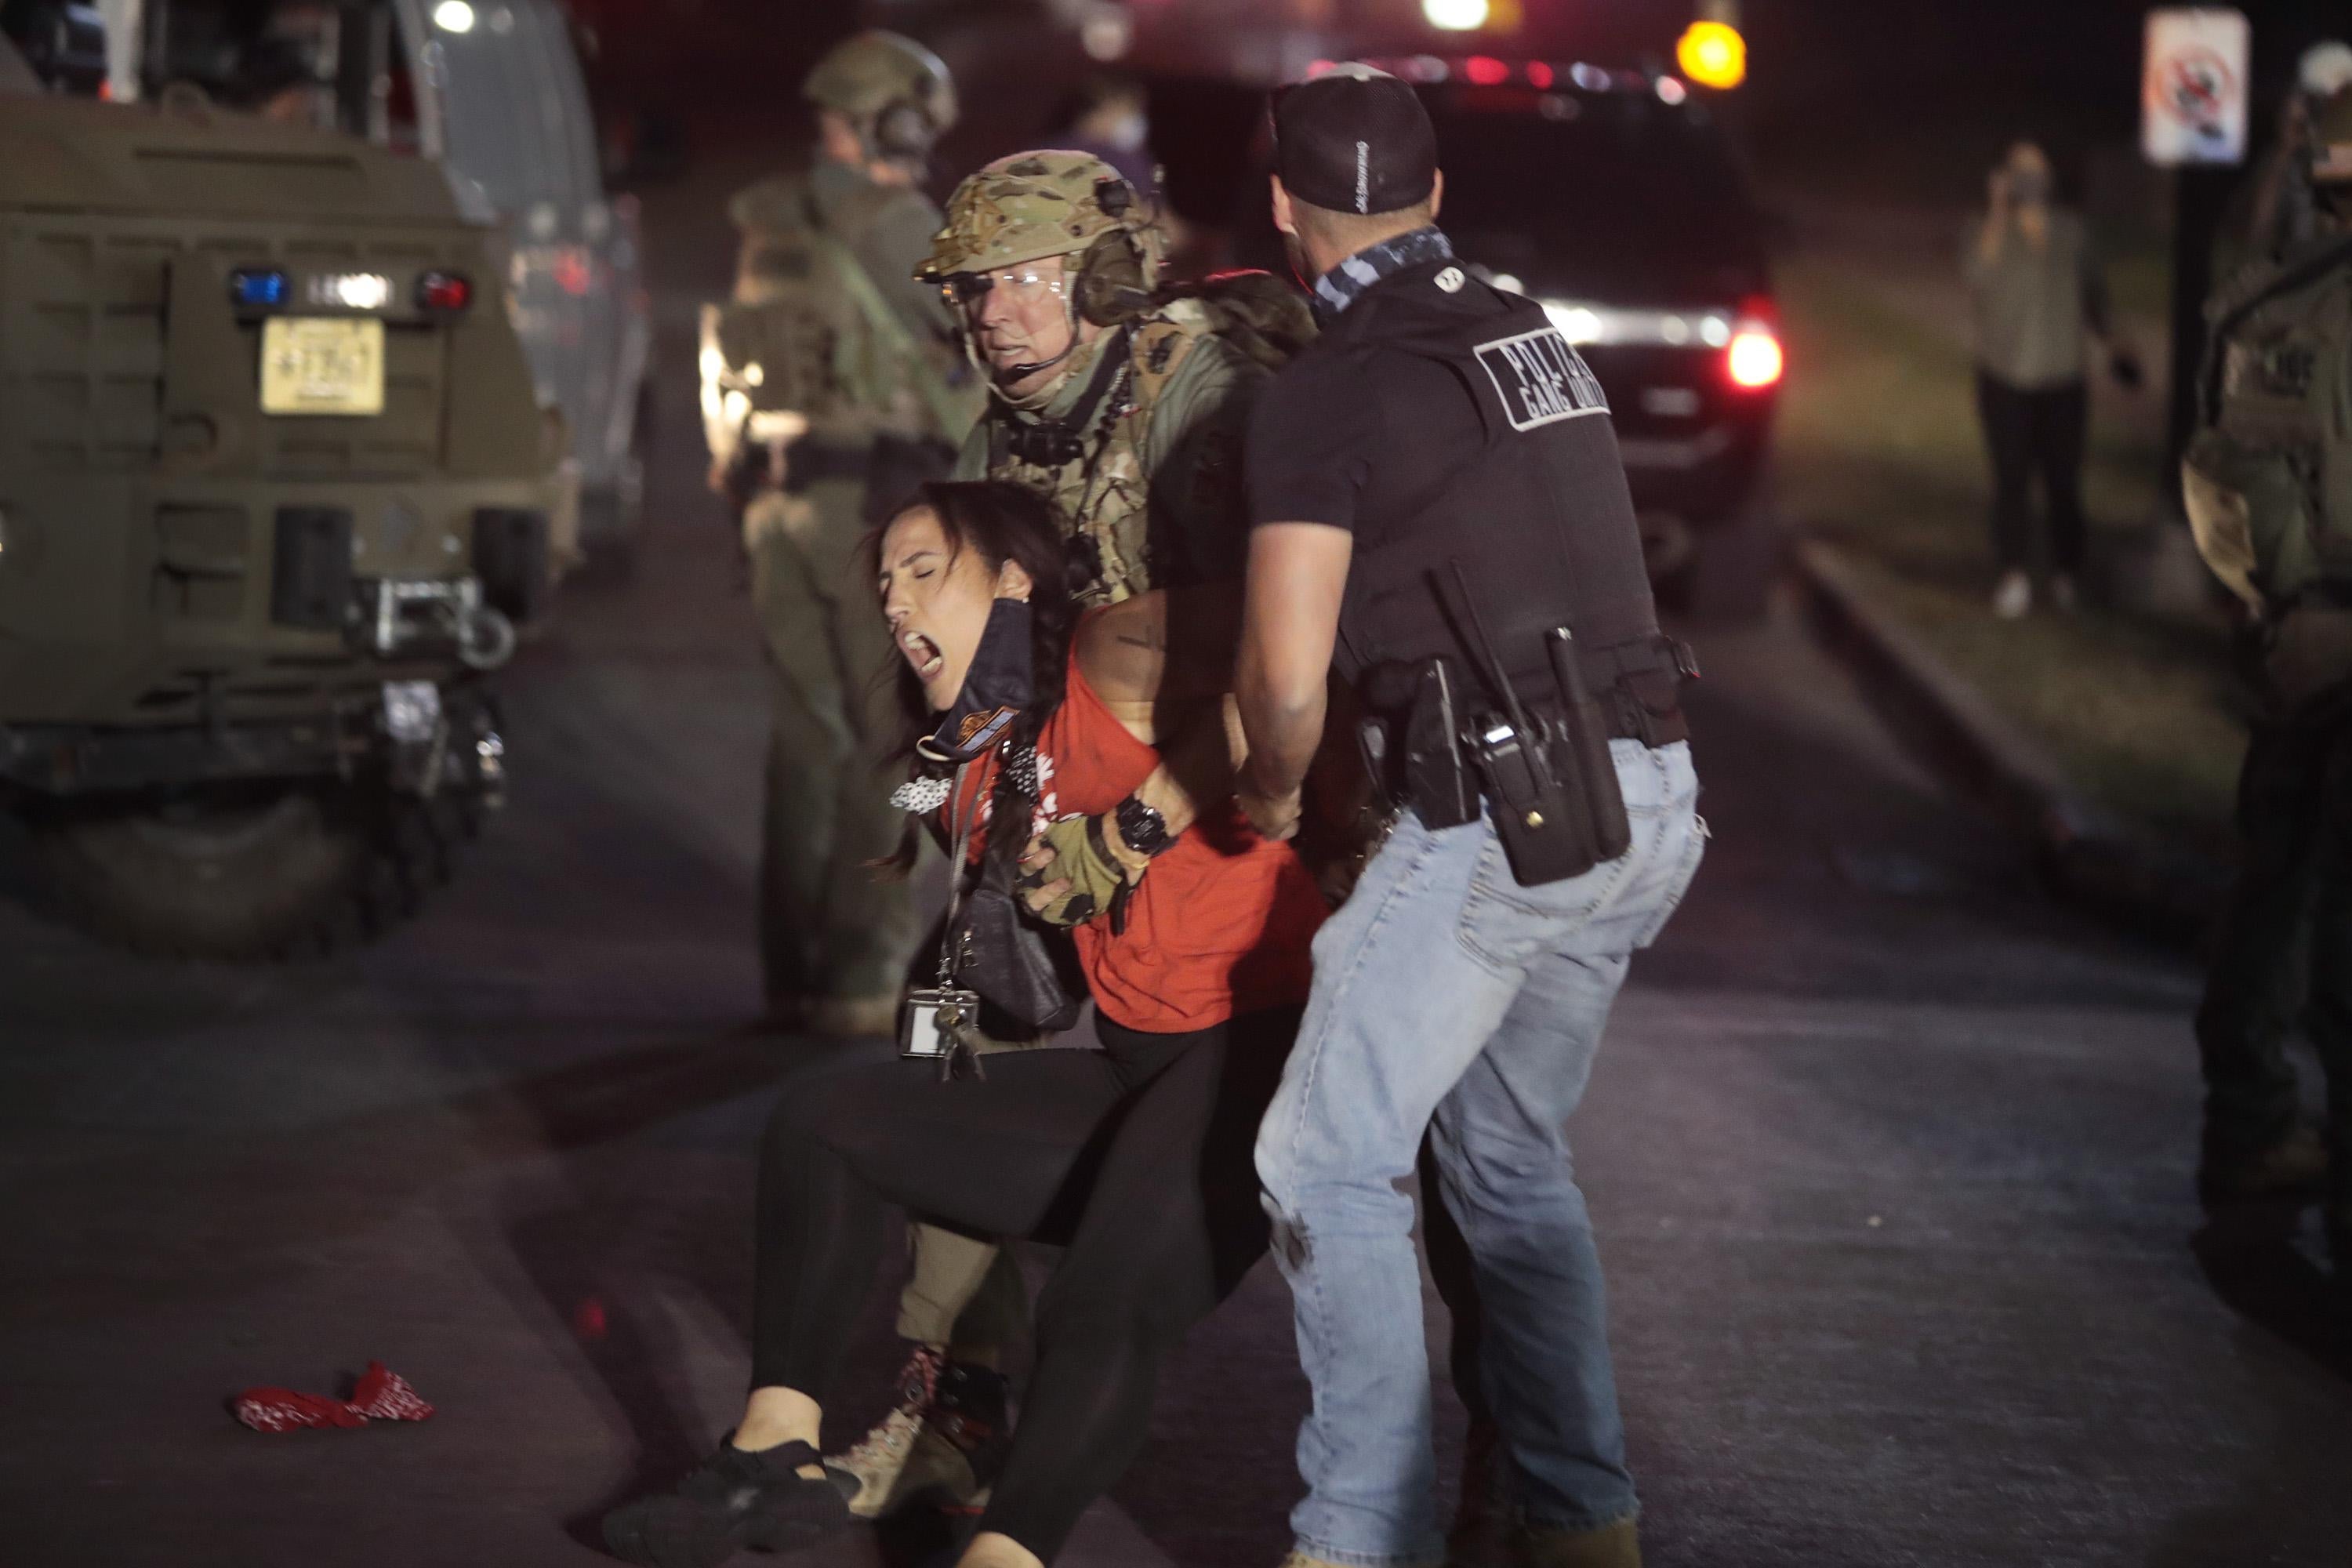 A National Guardsman and a plainclothes law enforcement officer grab a screaming woman